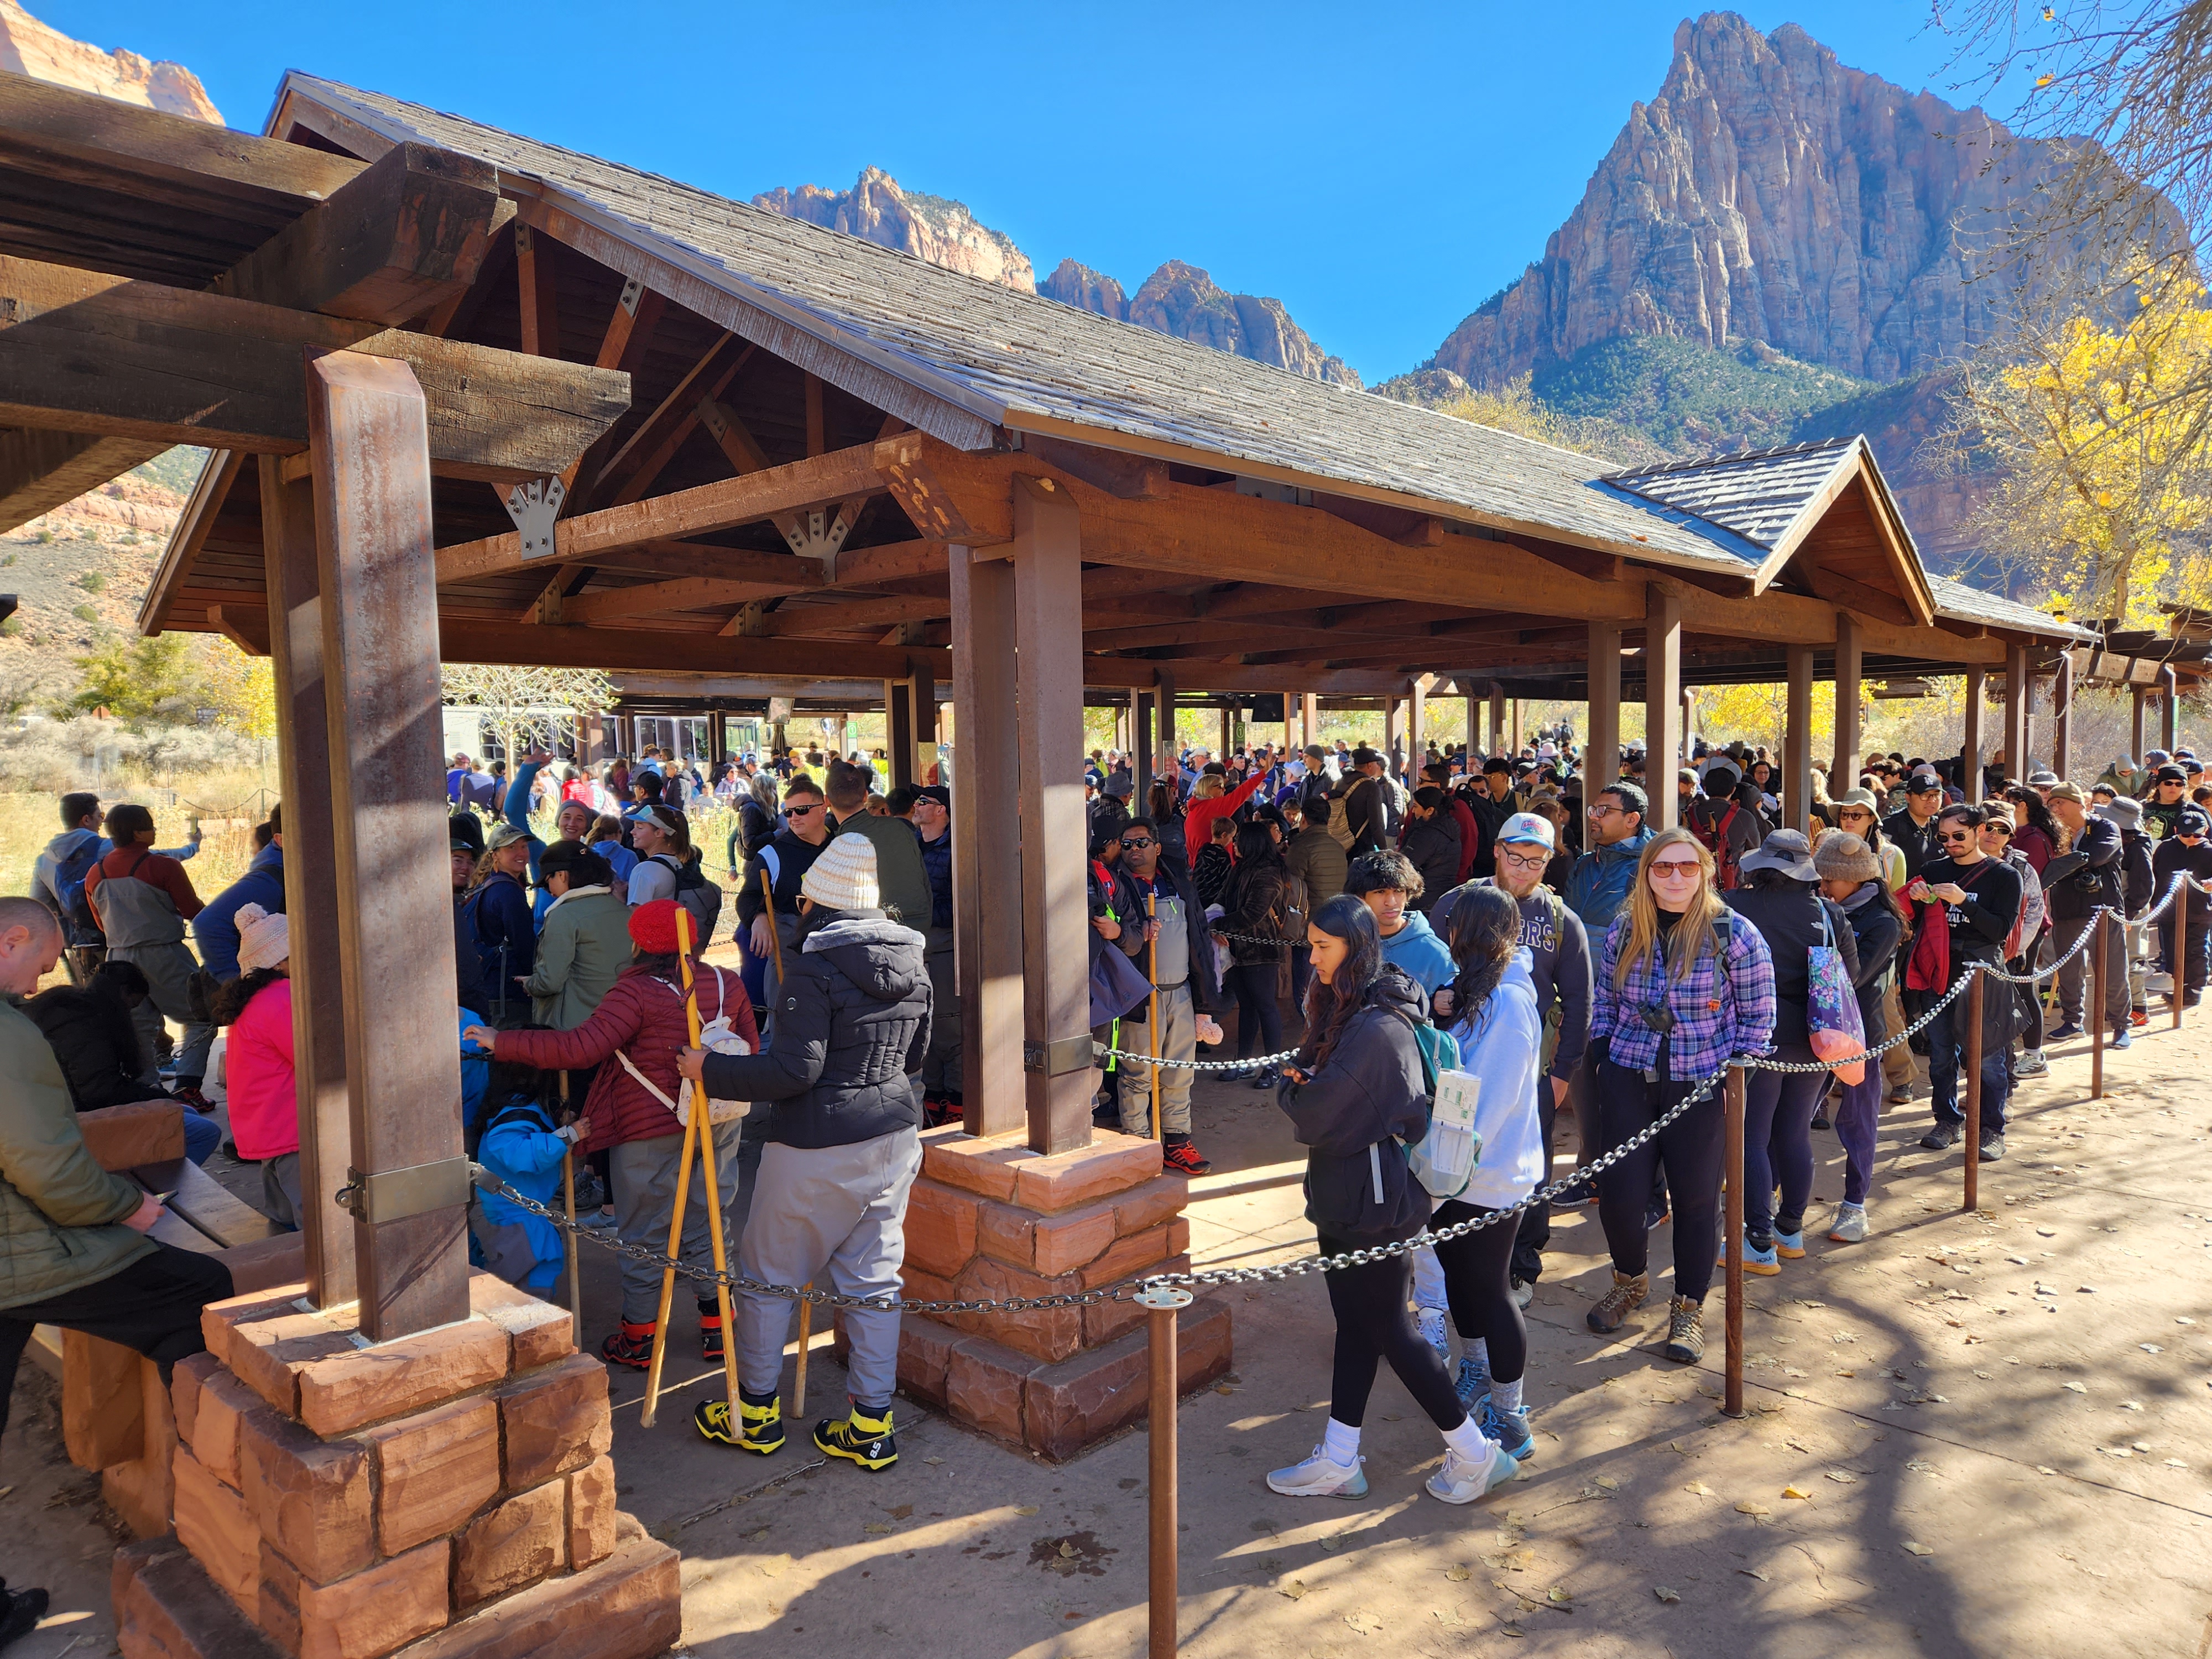 A long line of people waiting to board the Zion shuttle bus